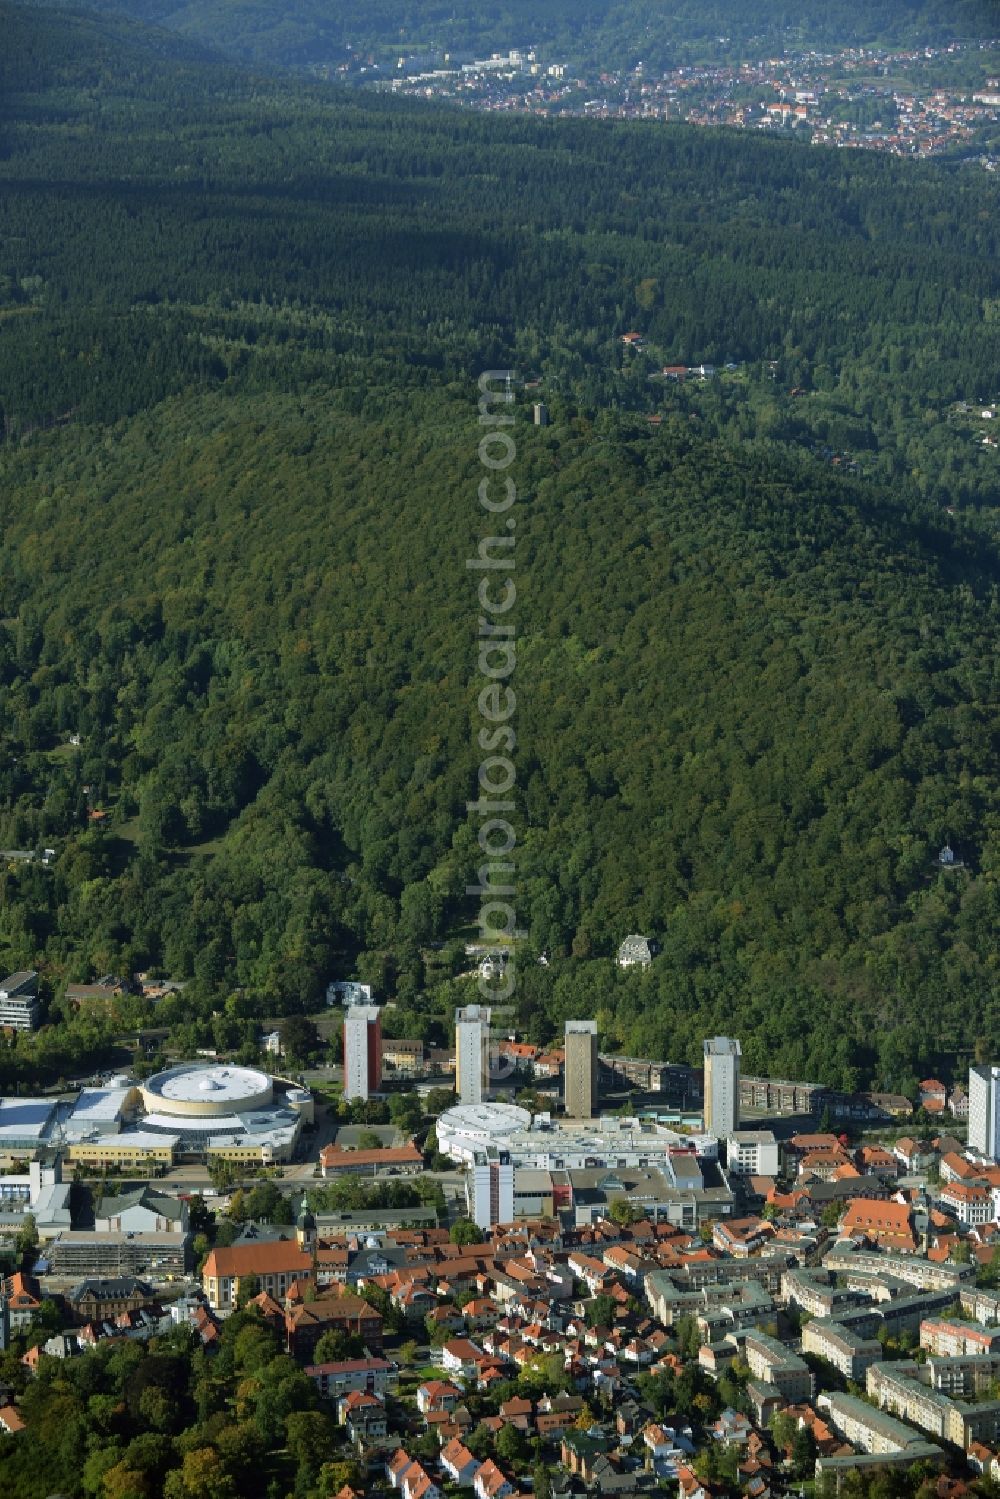 Aerial photograph Suhl - View of the town centre of Suhl in the state of Thuringia. The background shows Lauterbogen Center and the Congress Center of Suhl. Forest and hills of the Adlersberg Mountains are located in the background